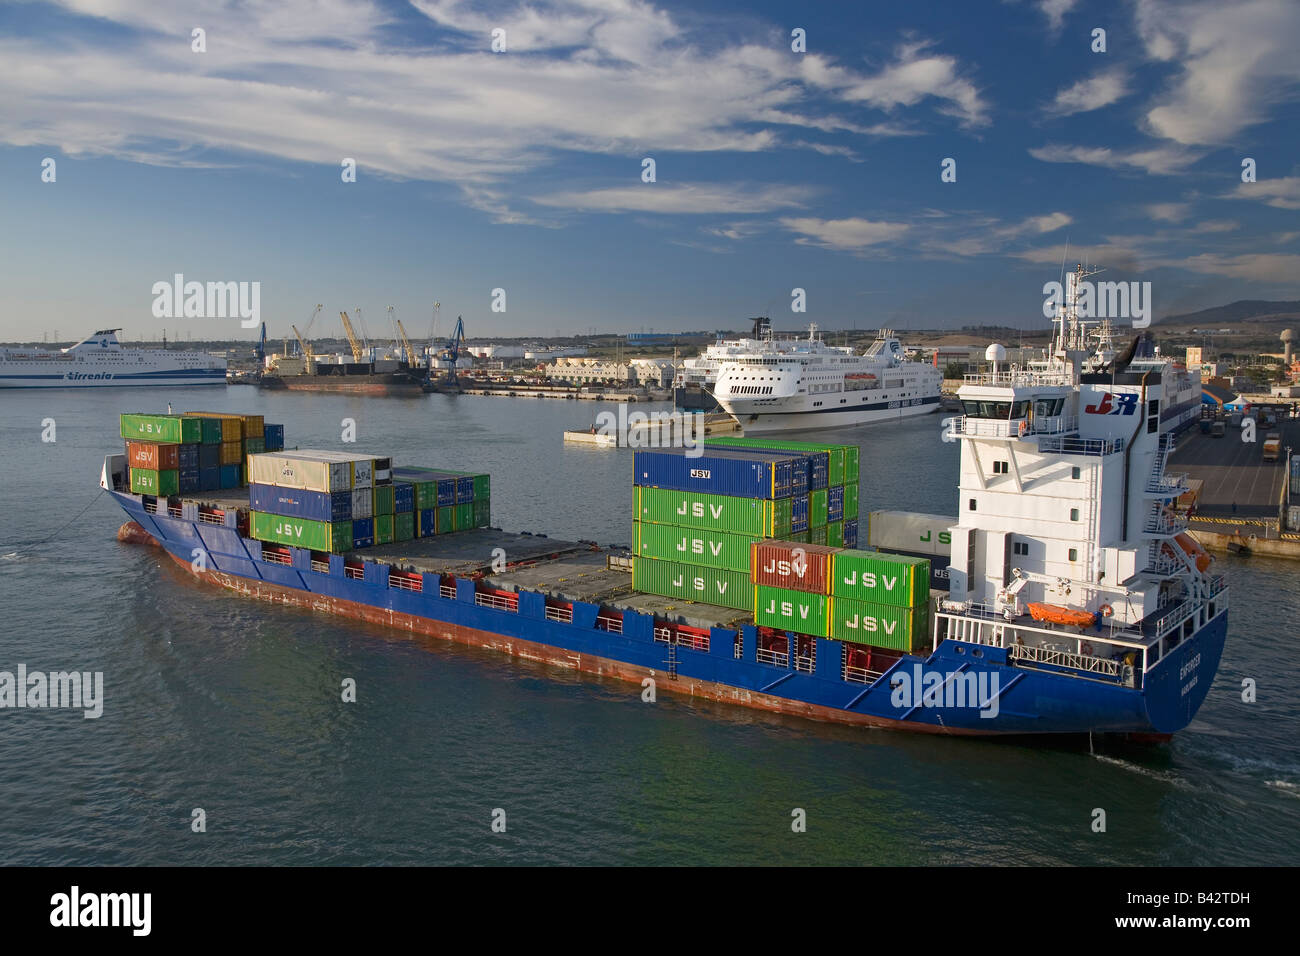 Cargo ship carrying containers departing Port of Civitavecchia, Italy, the Port of Rome Stock Photo